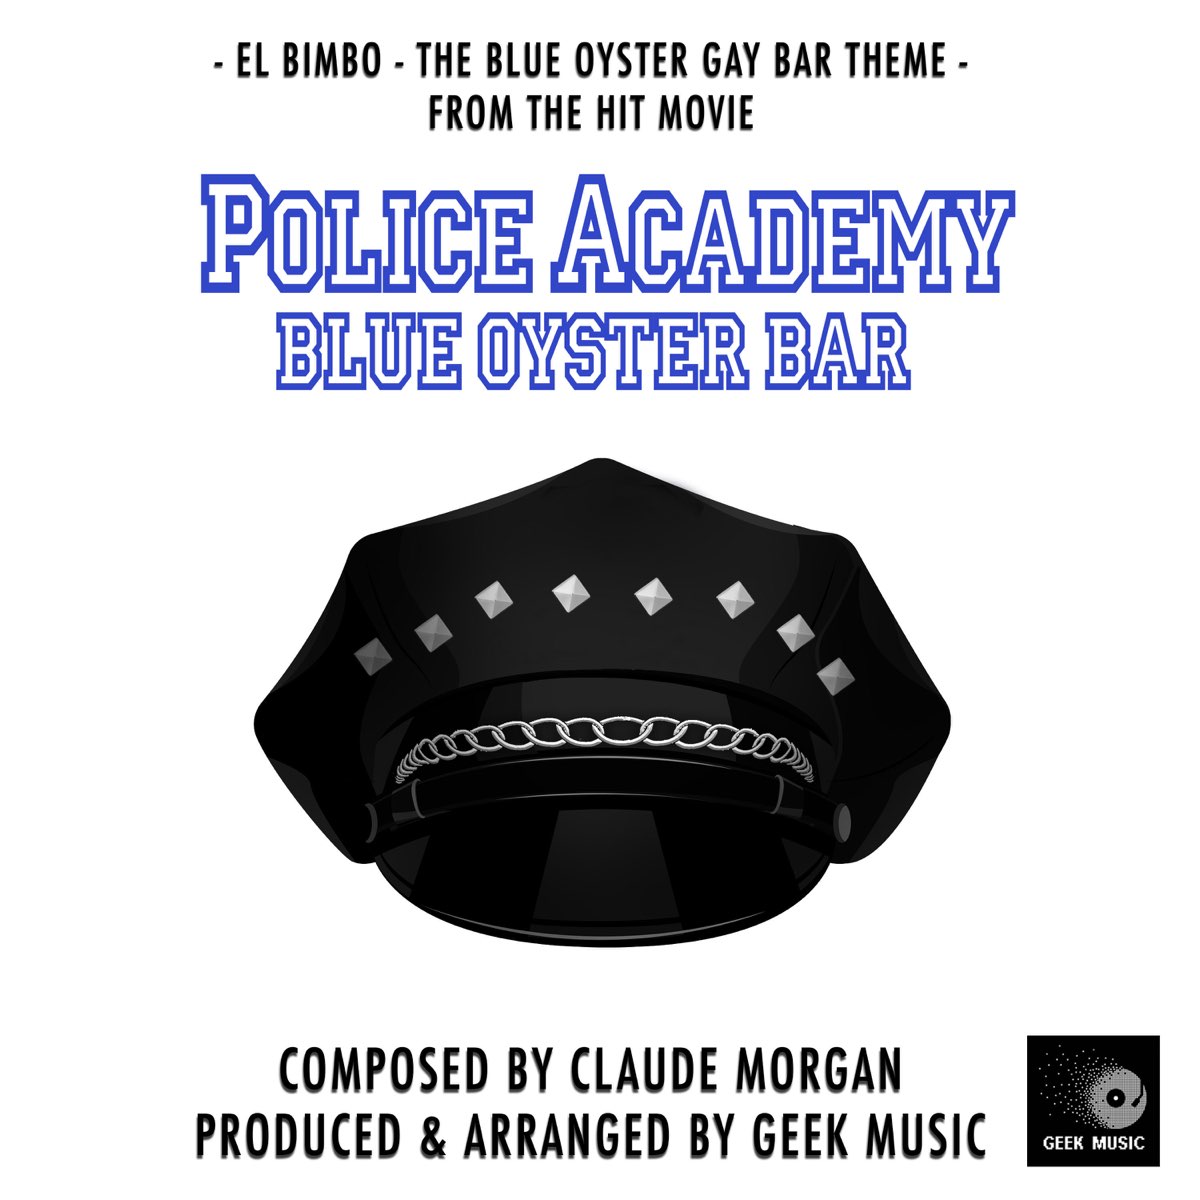 El Bimbo - The Blue Oyster Gay Bar Theme (From "Police Academy") - Single  by Geek Music on Apple Music